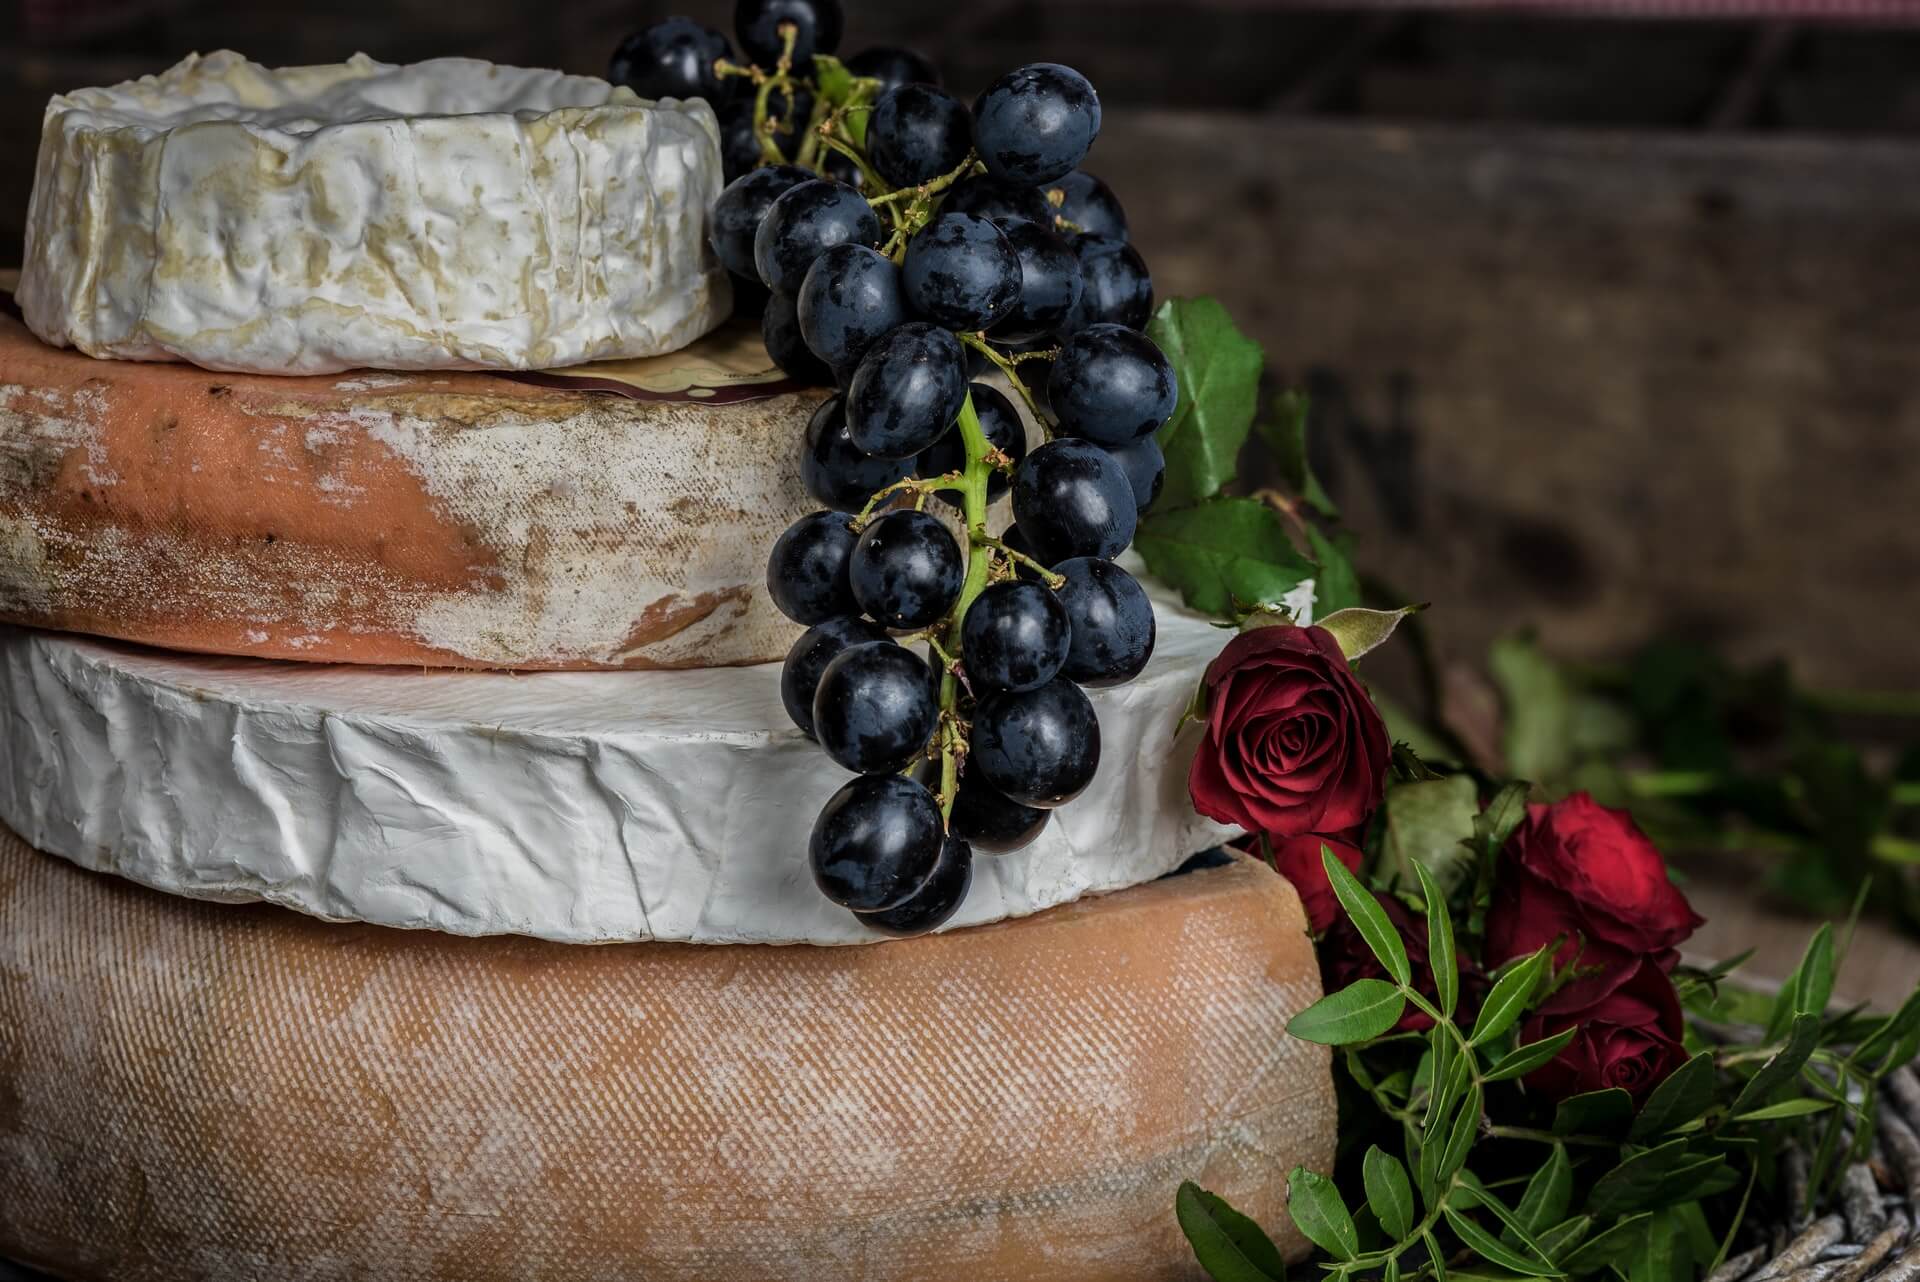 grapes and cheese , what france makes known